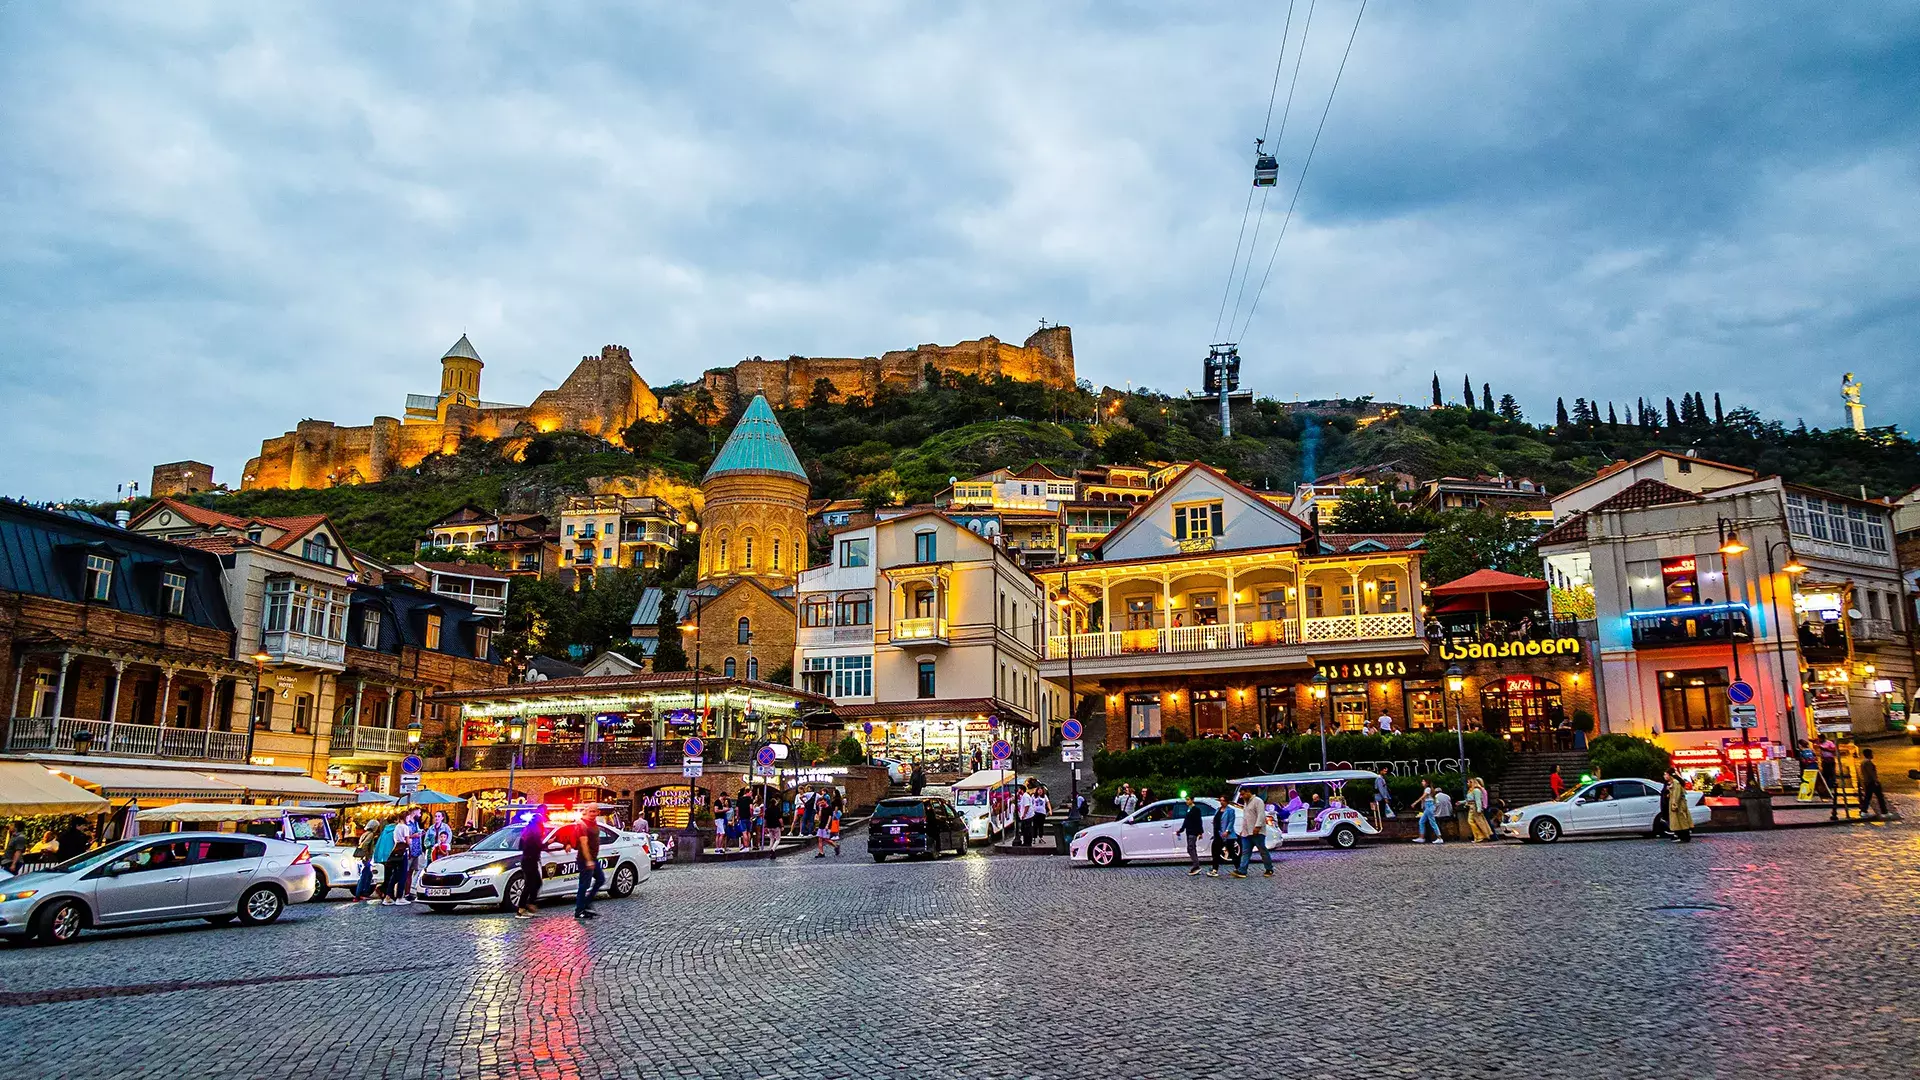 Travel Tips for Exploring Tbilisi